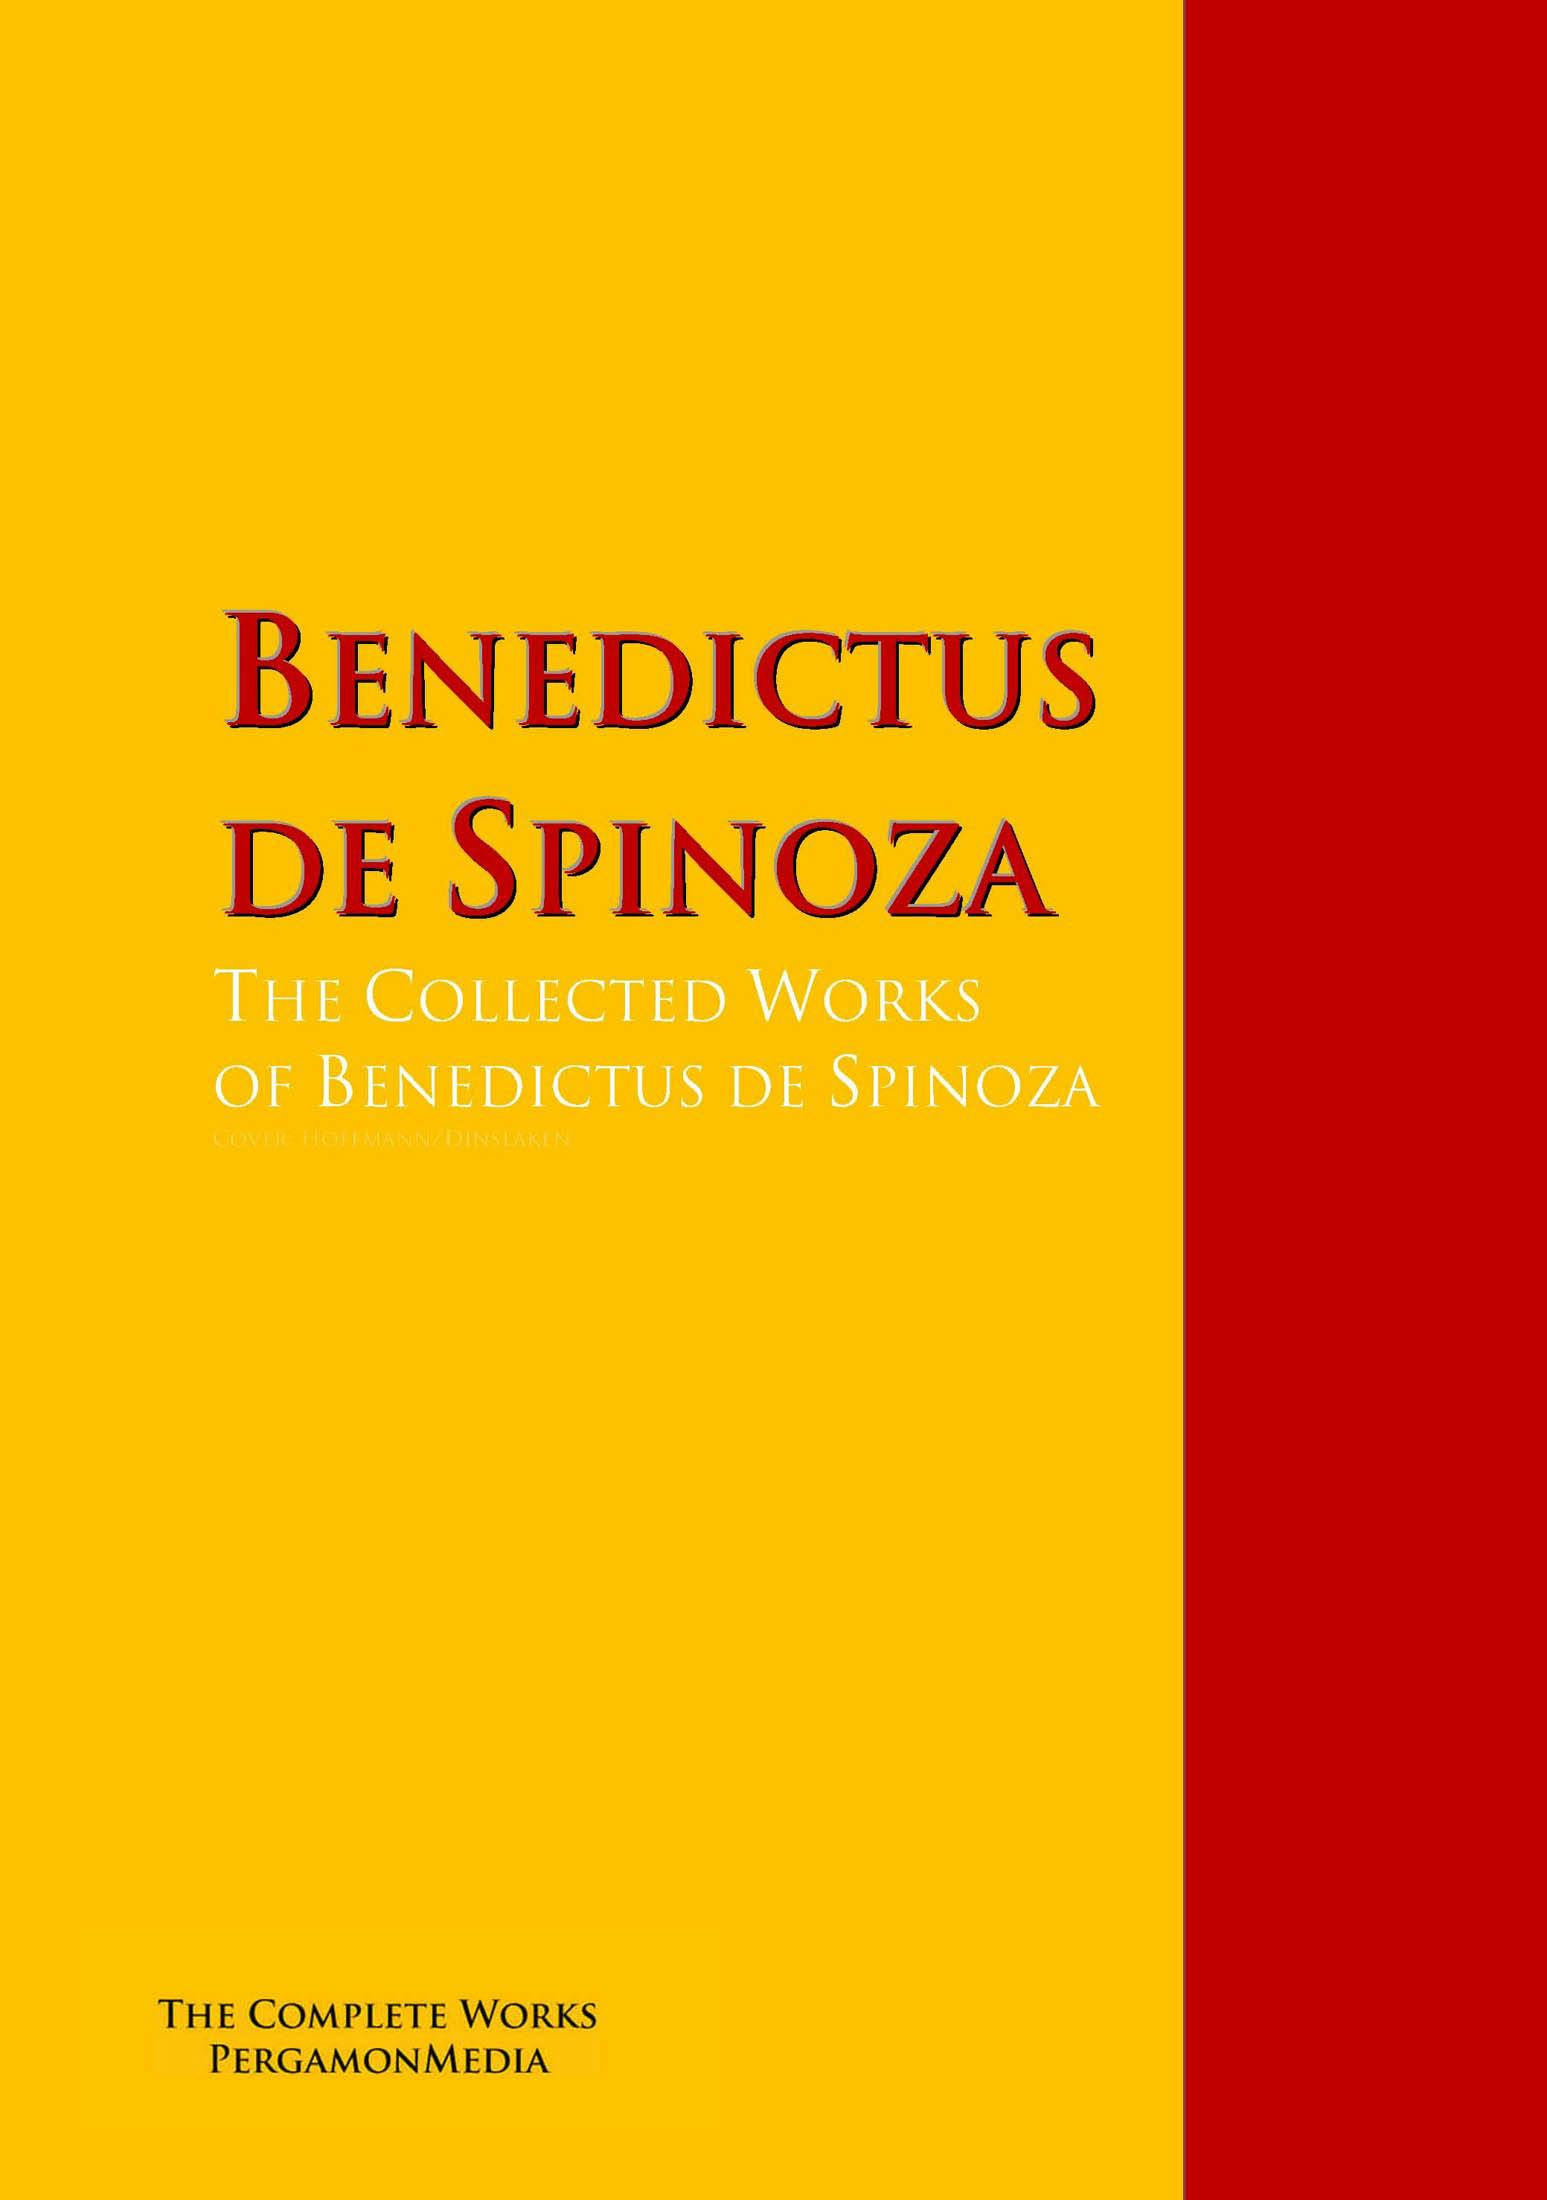 The Collected Works of Benedictus de Spinoza - Benedictus de Spinoza, Baruch de Spinoza